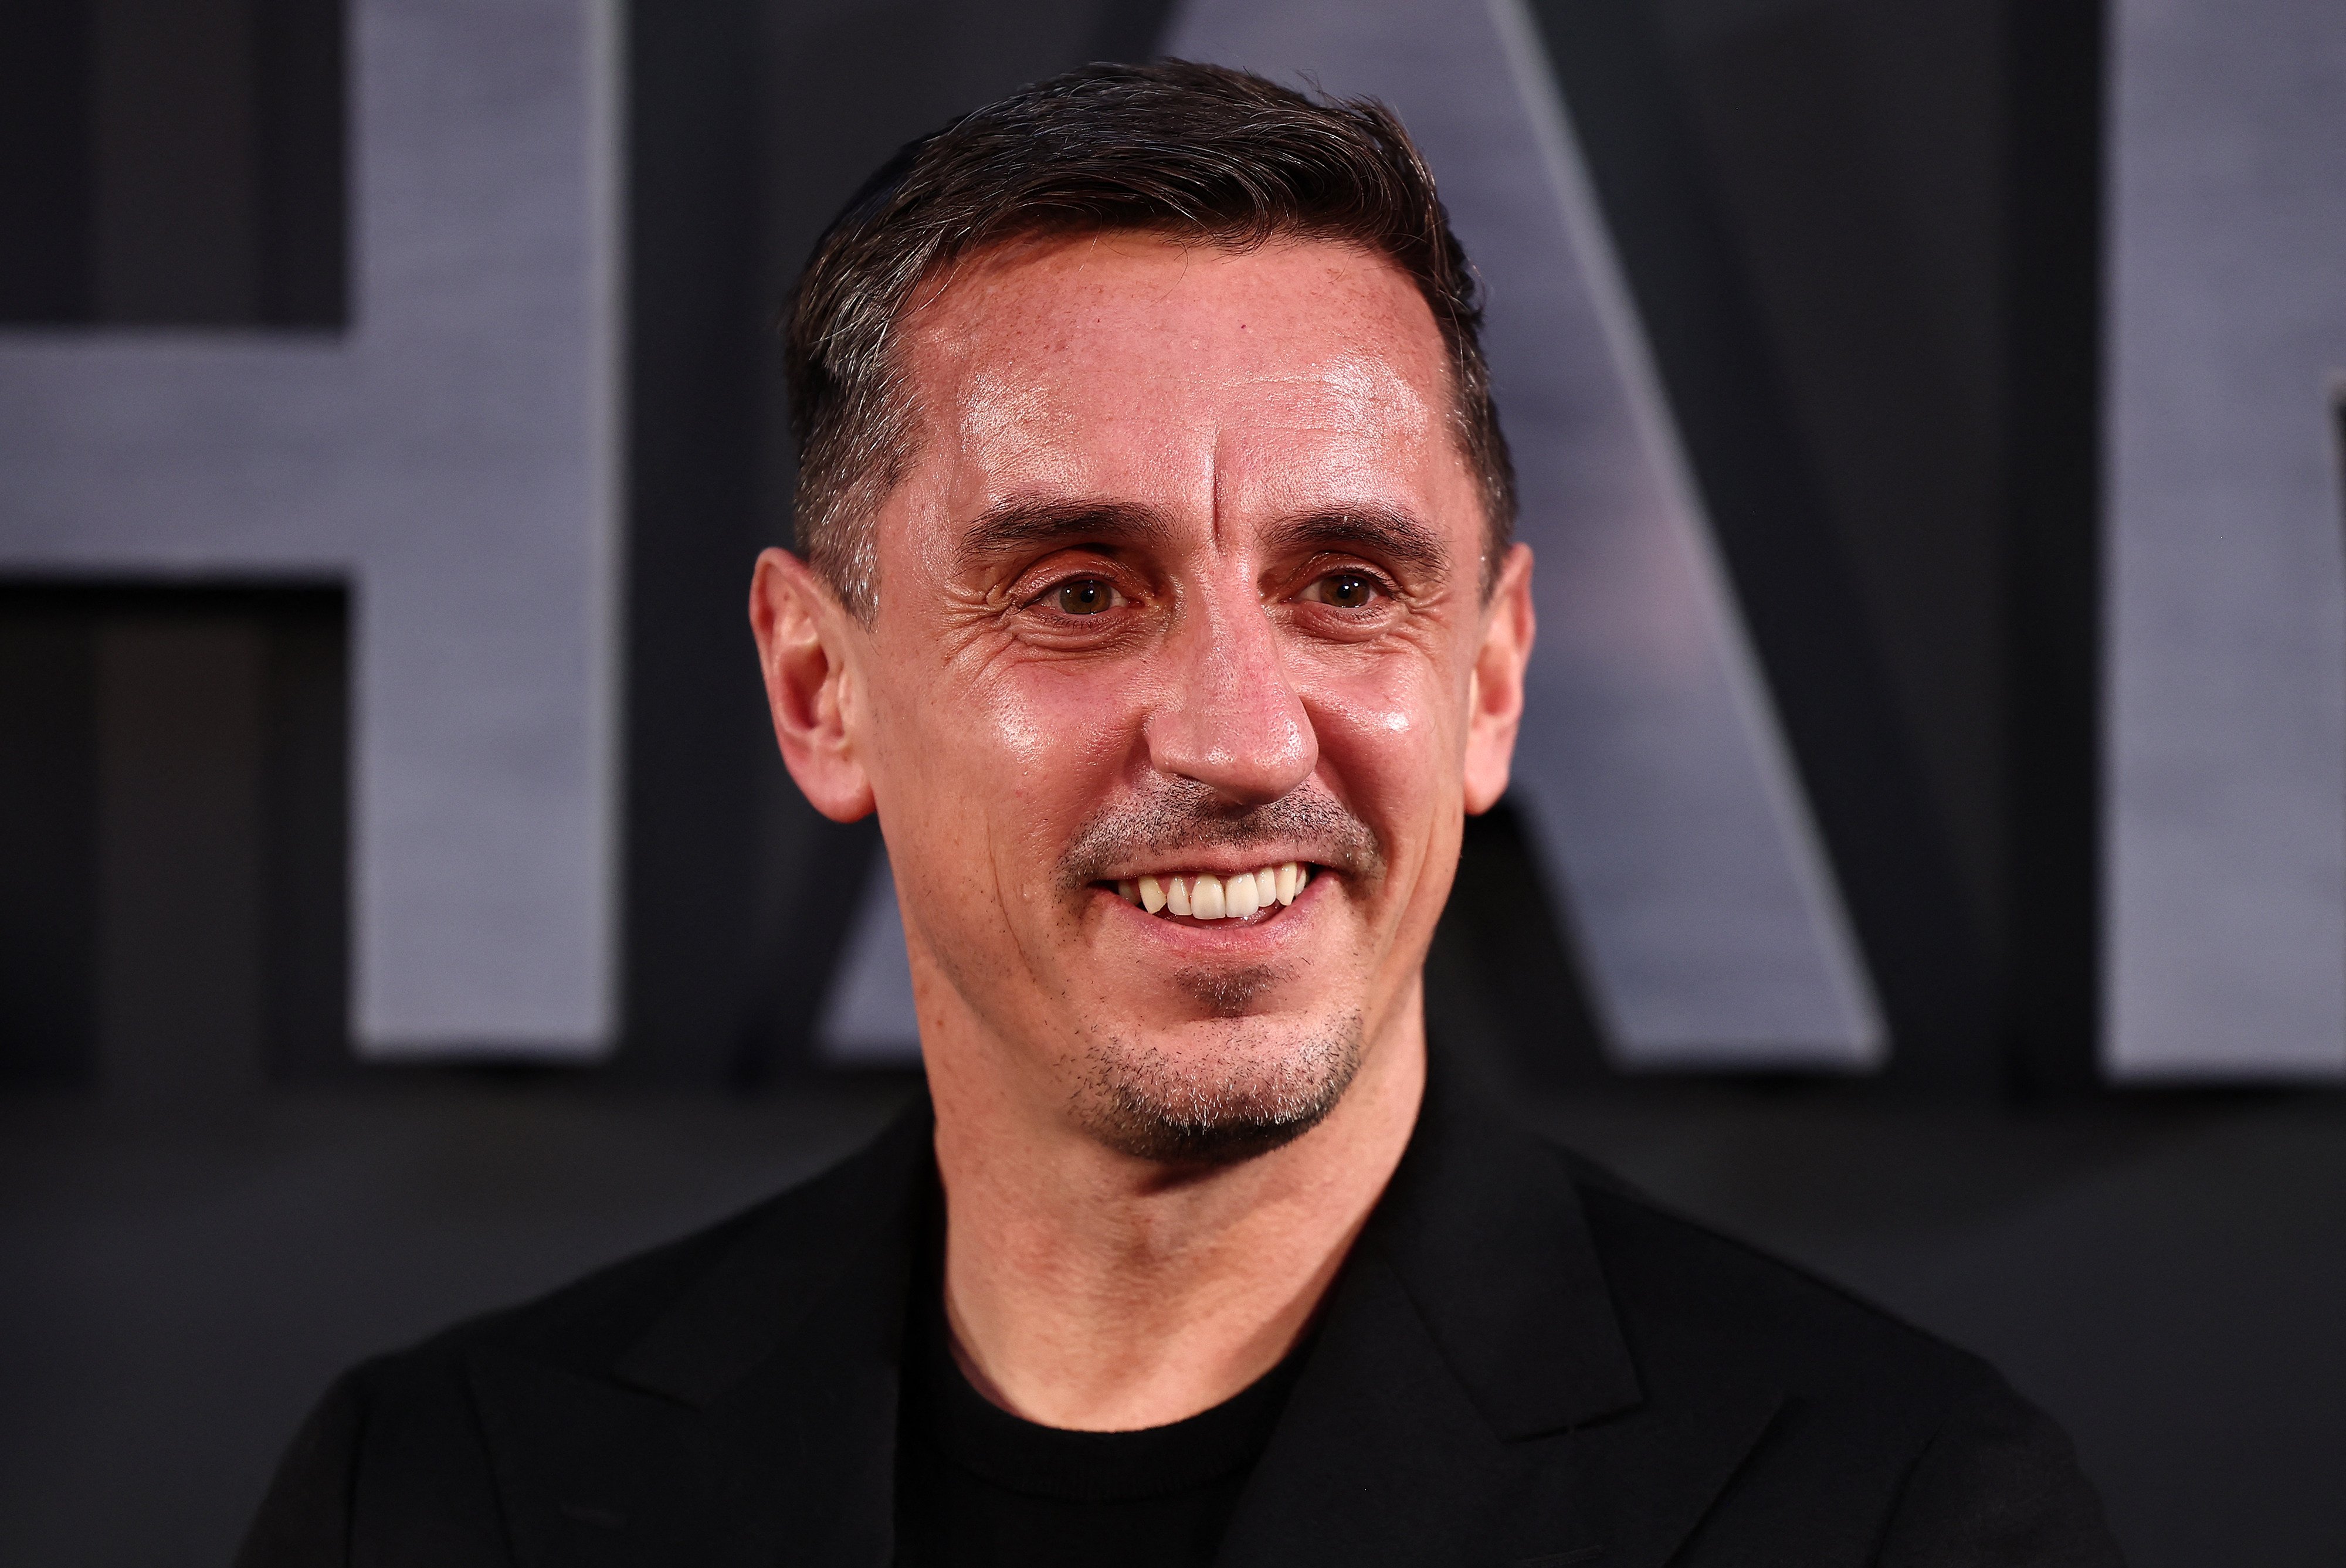 Former footballer Gary Neville is marketing to Hongkongers, flats in a 41-storey tower in Manchester that will be the first branded residences and five-star hotel in the city located in northwest England. Photo: AFP